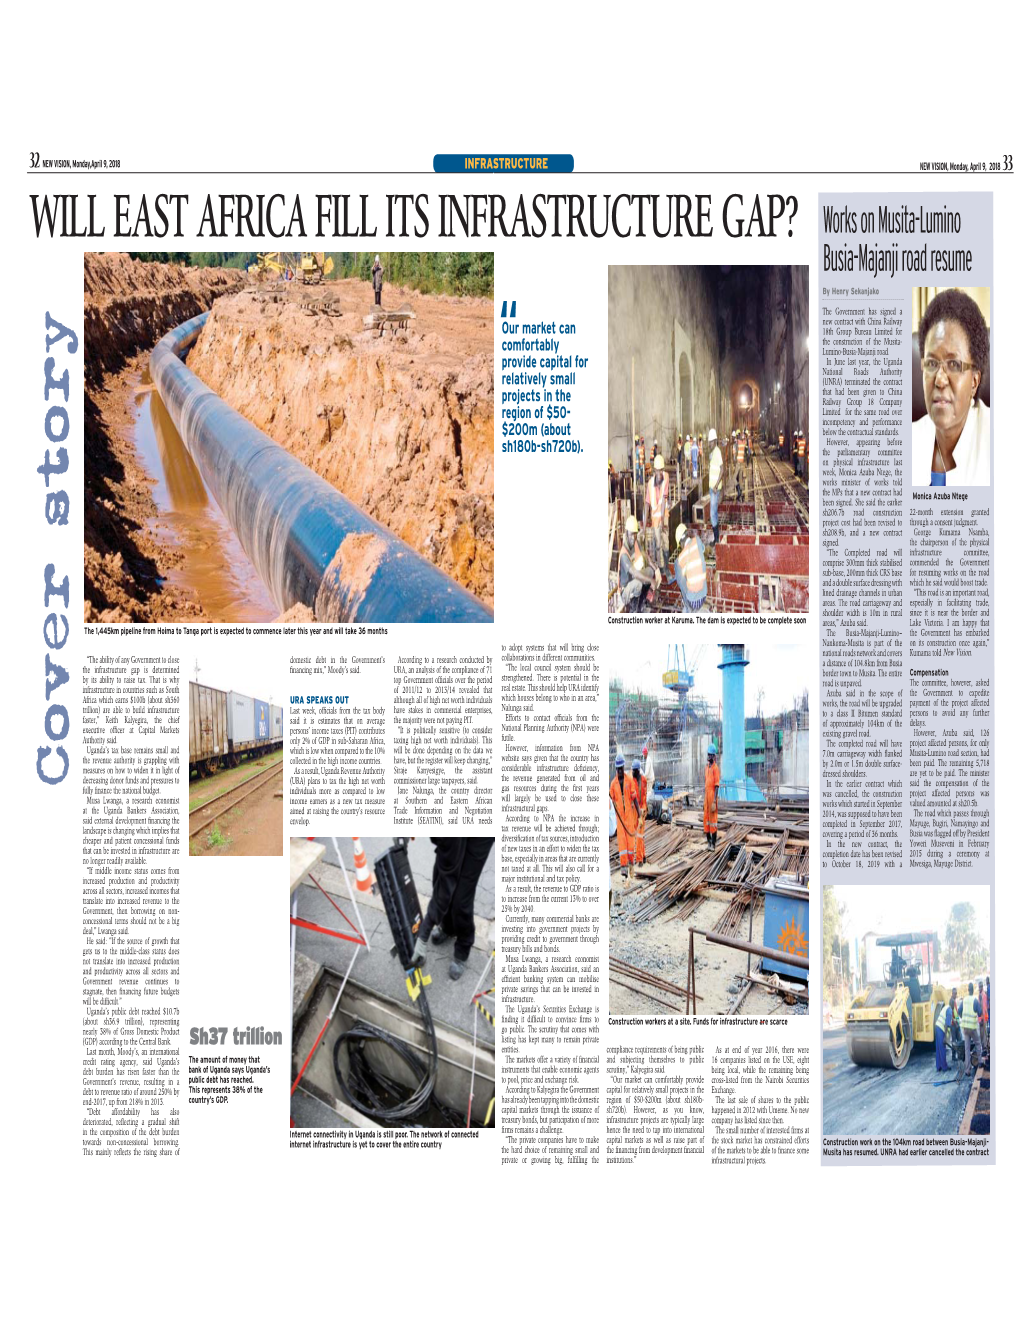 Infrastructure Spread April 9.Indd